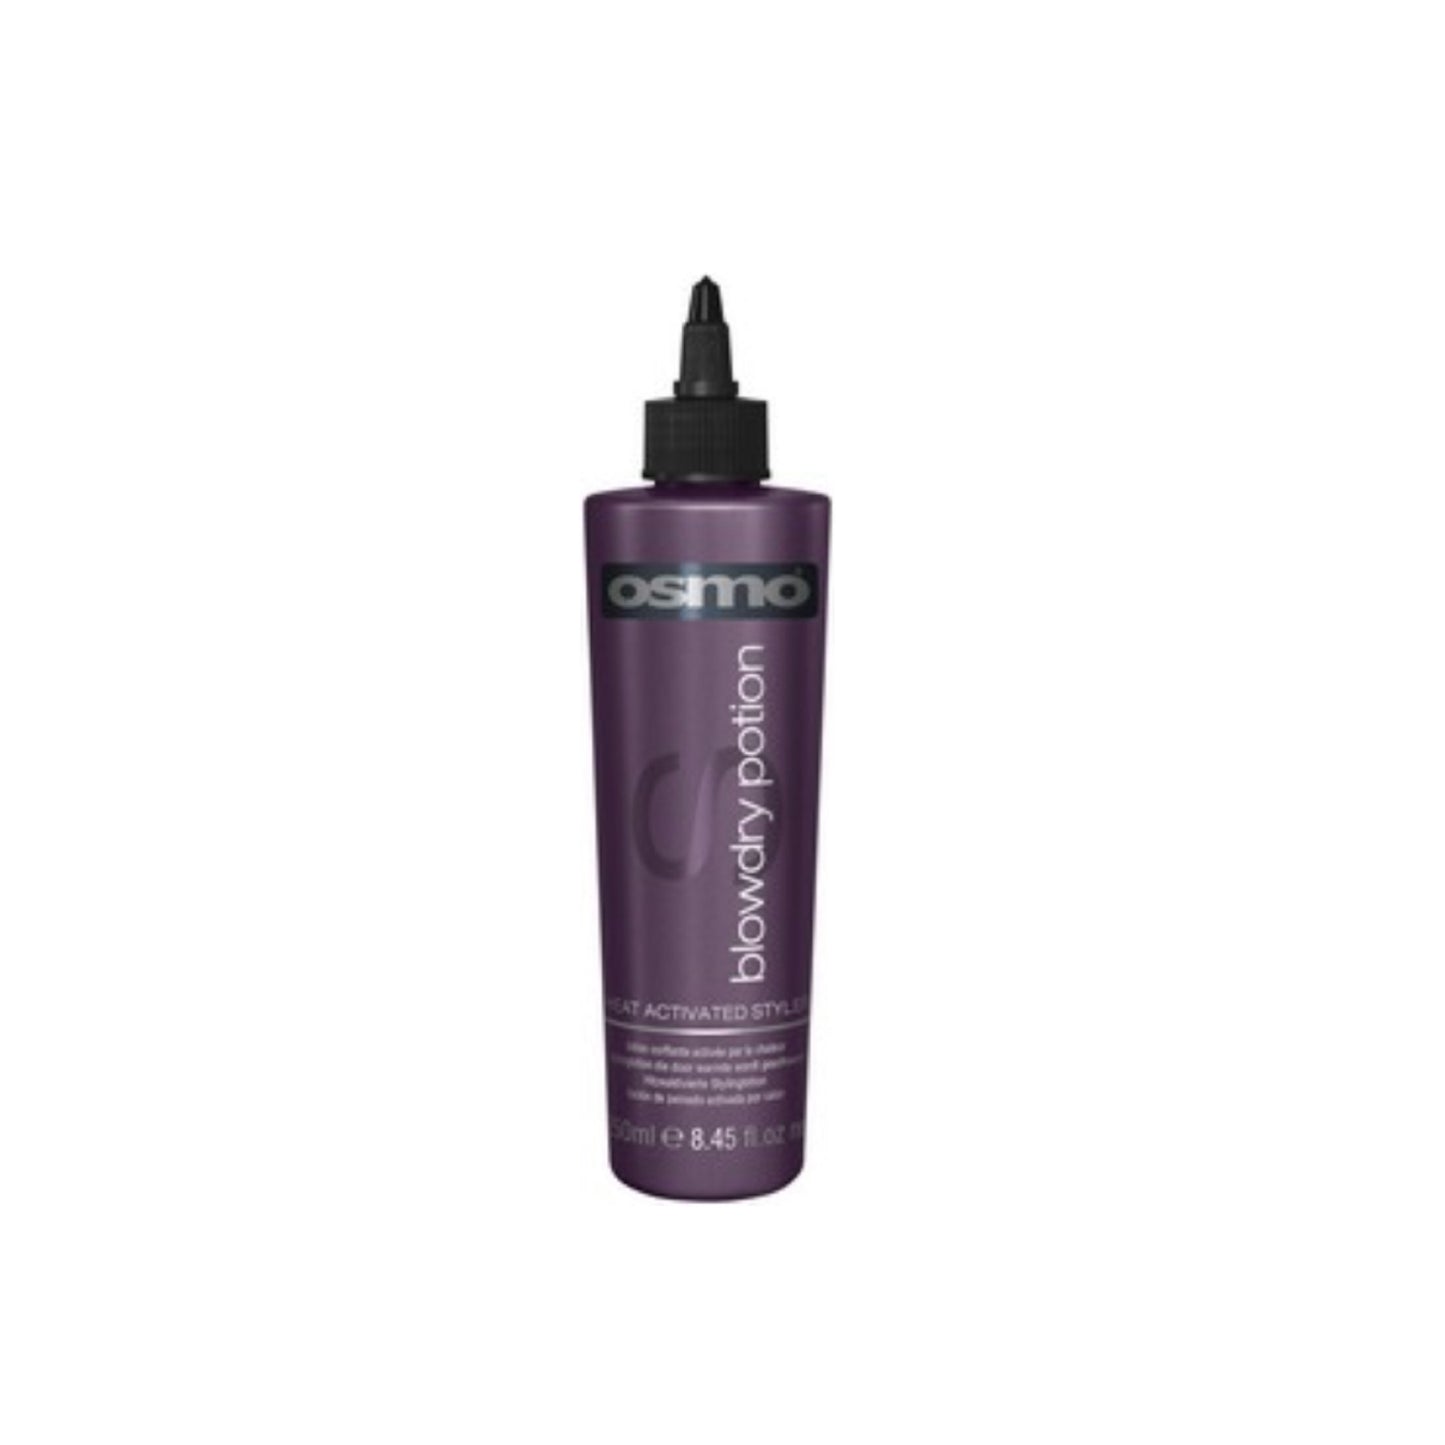 Osmo Blowdry Potion Heat Activated Styler (250ml)